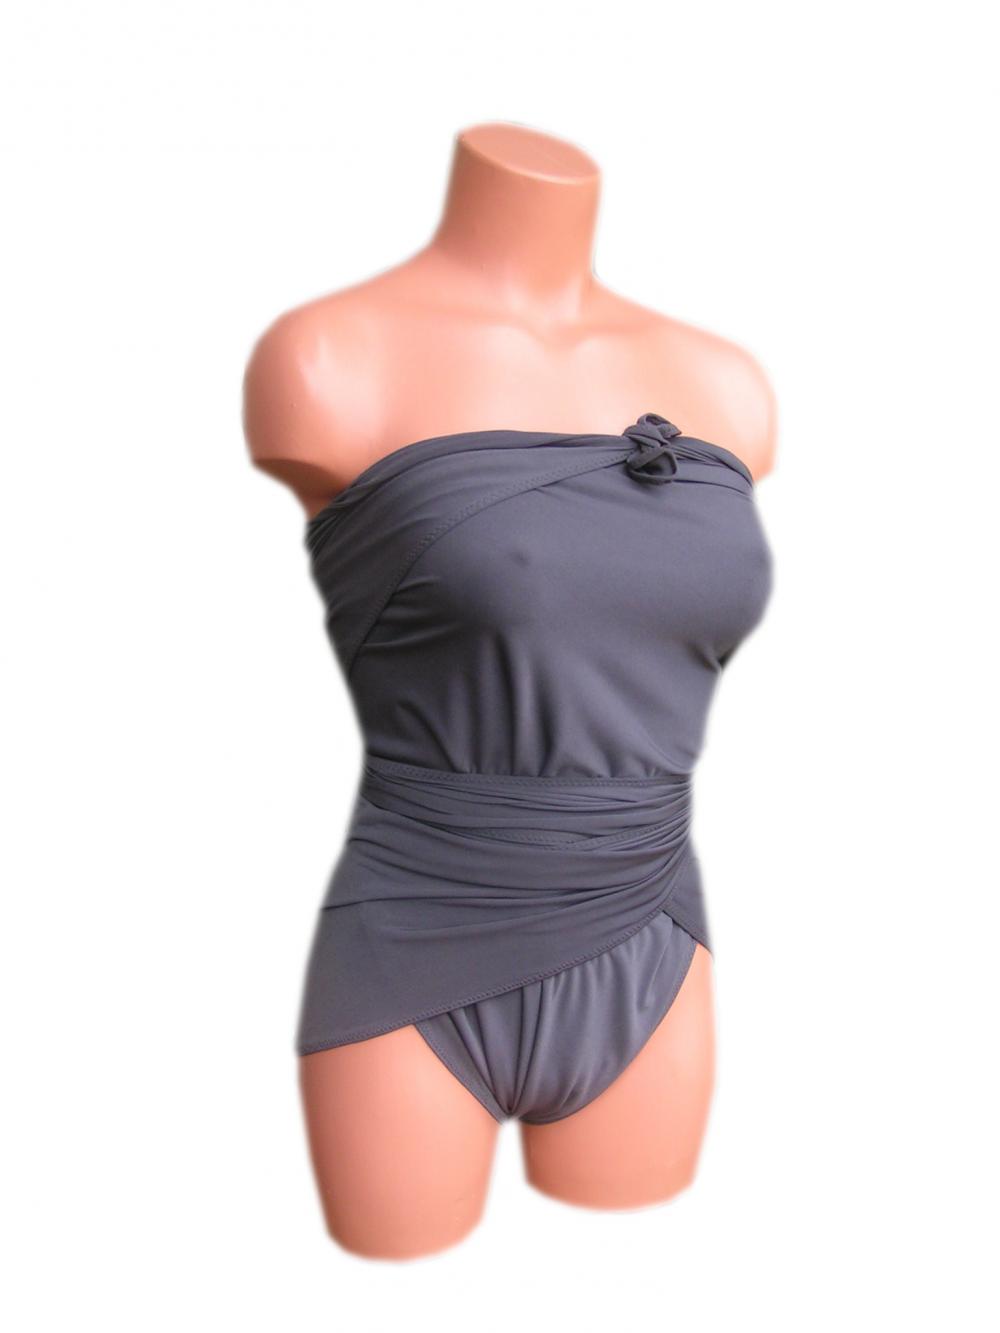 Large Bathing Suit Wrap-around Swimsuit Solid Charcoal Grey Plus Size